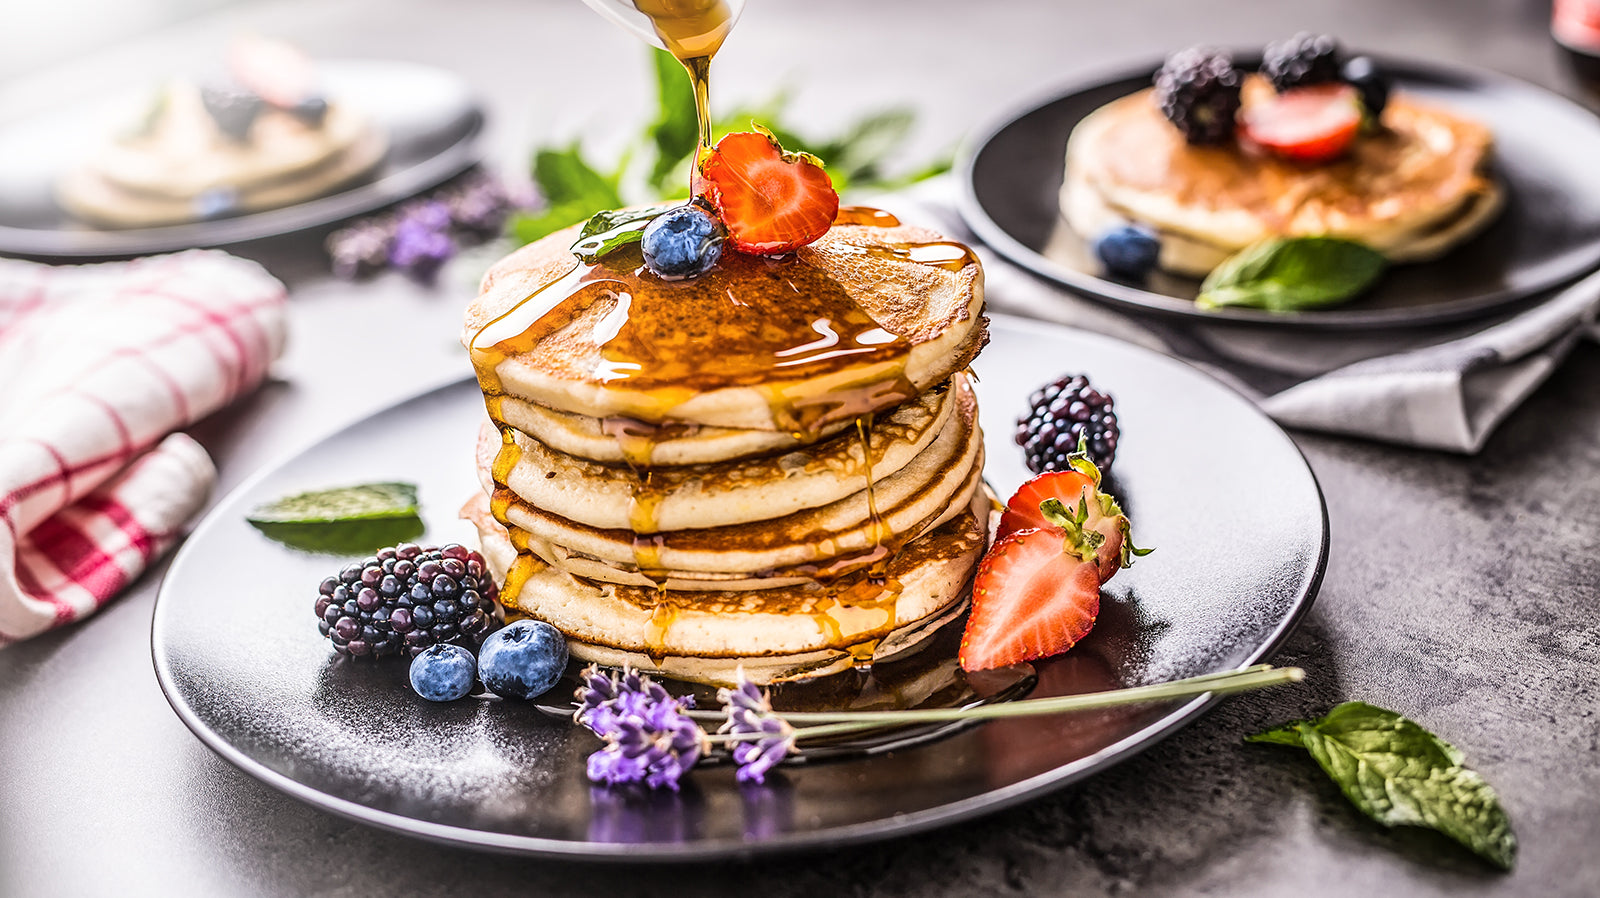 10 Delicious Mother's Day Brunch Ideas to Spoil Mom